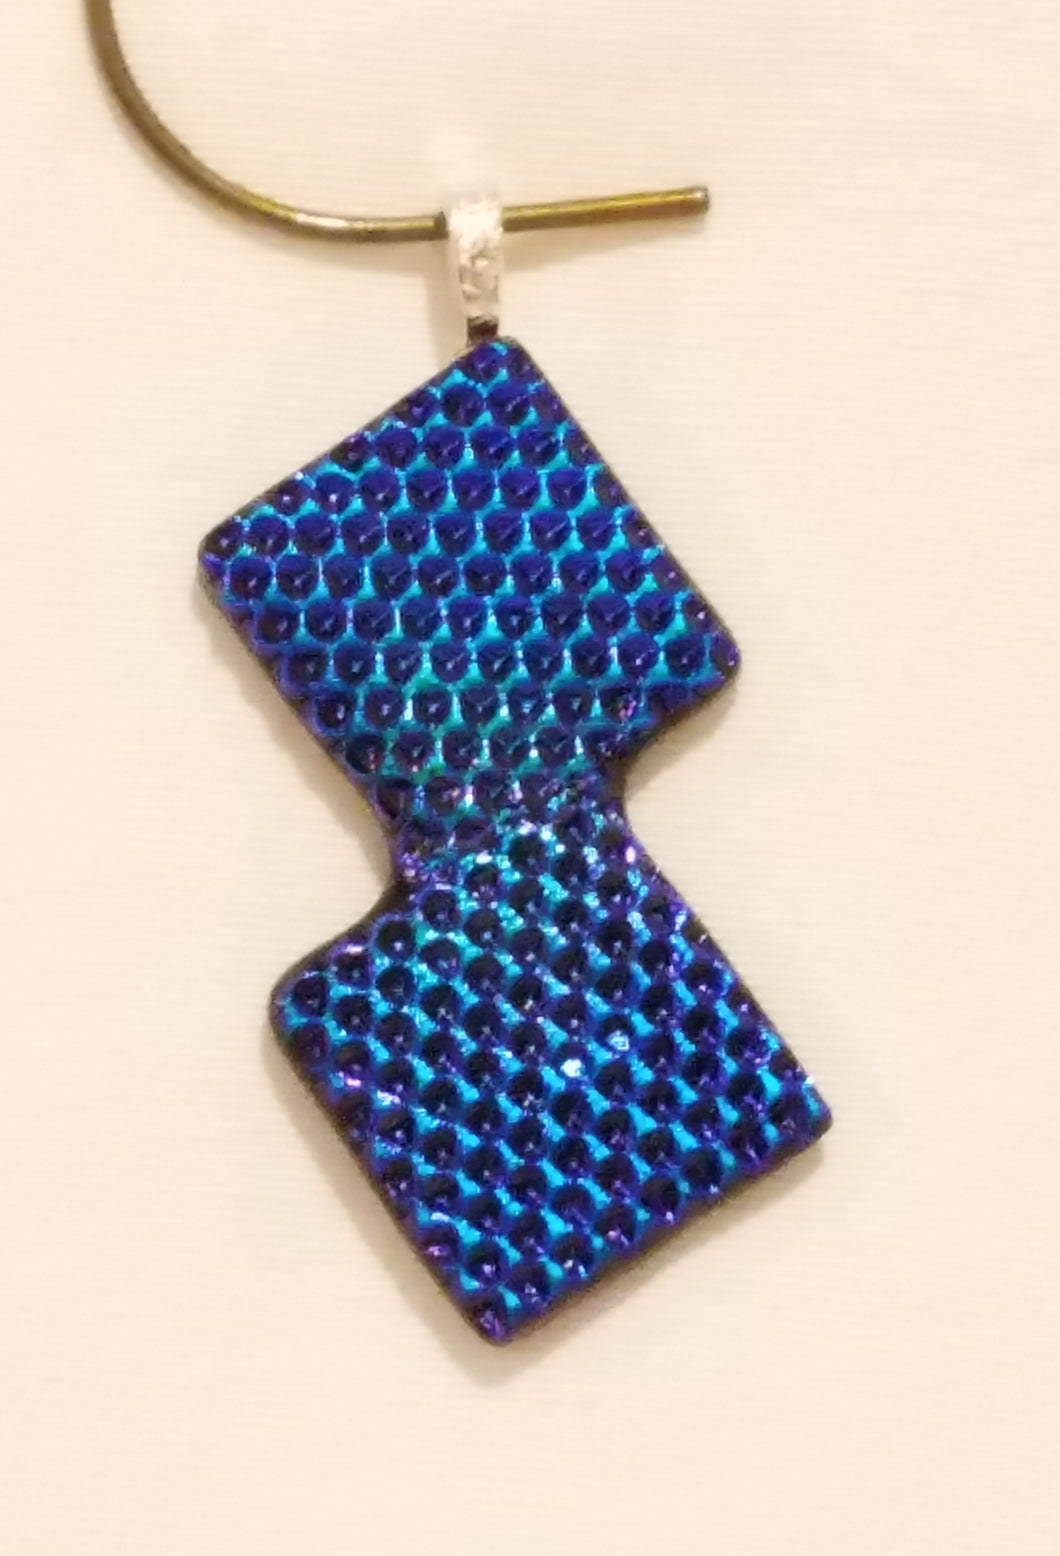 Connected Squares of Teal/Purple Deeply Textured Dichroic Fused Glass Pendant